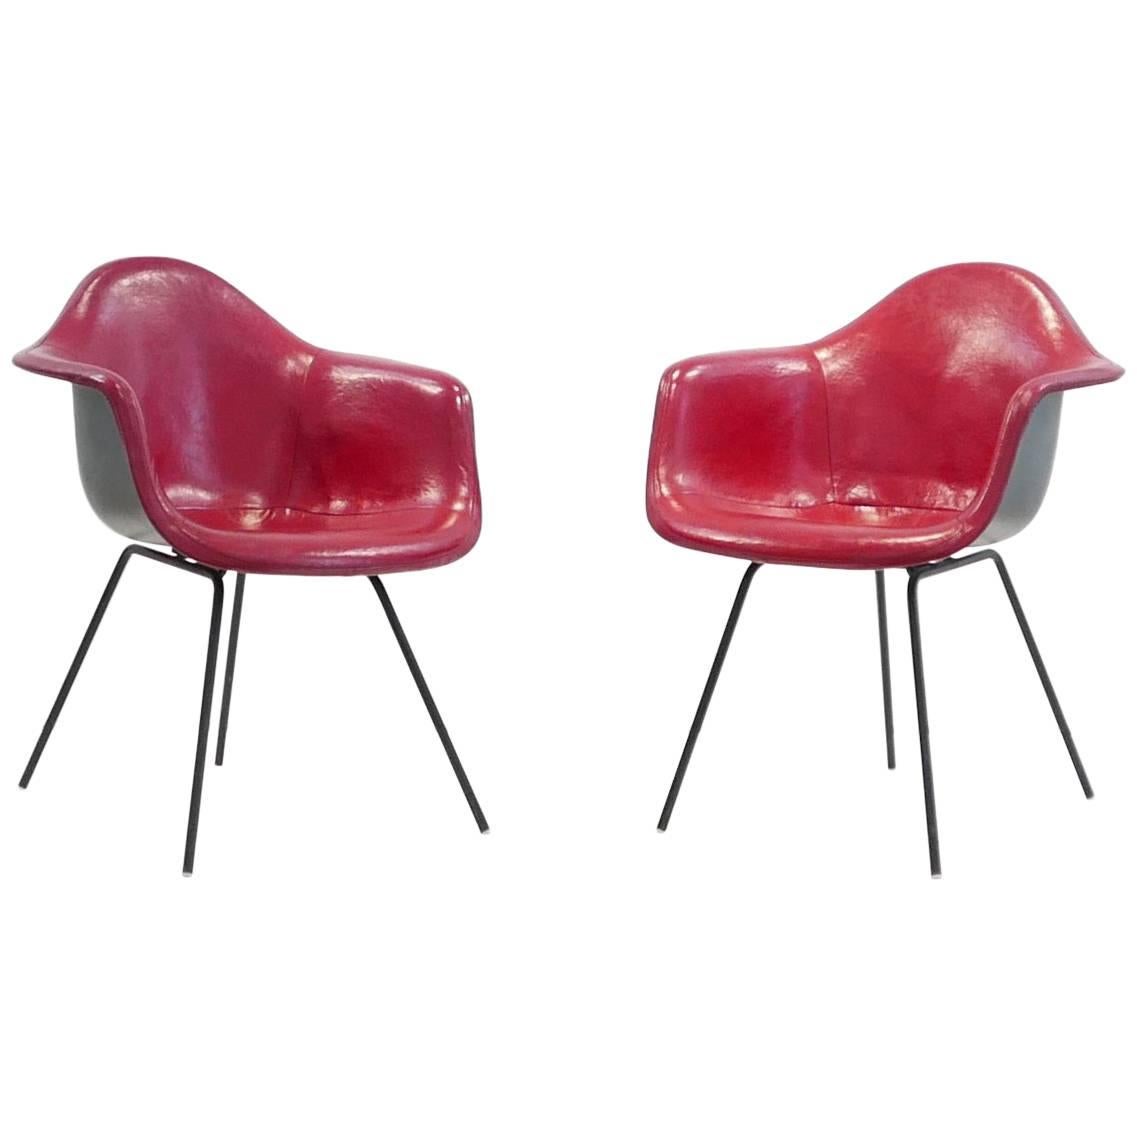 Charles and Ray Eames Pair of 'DAX' Chairs